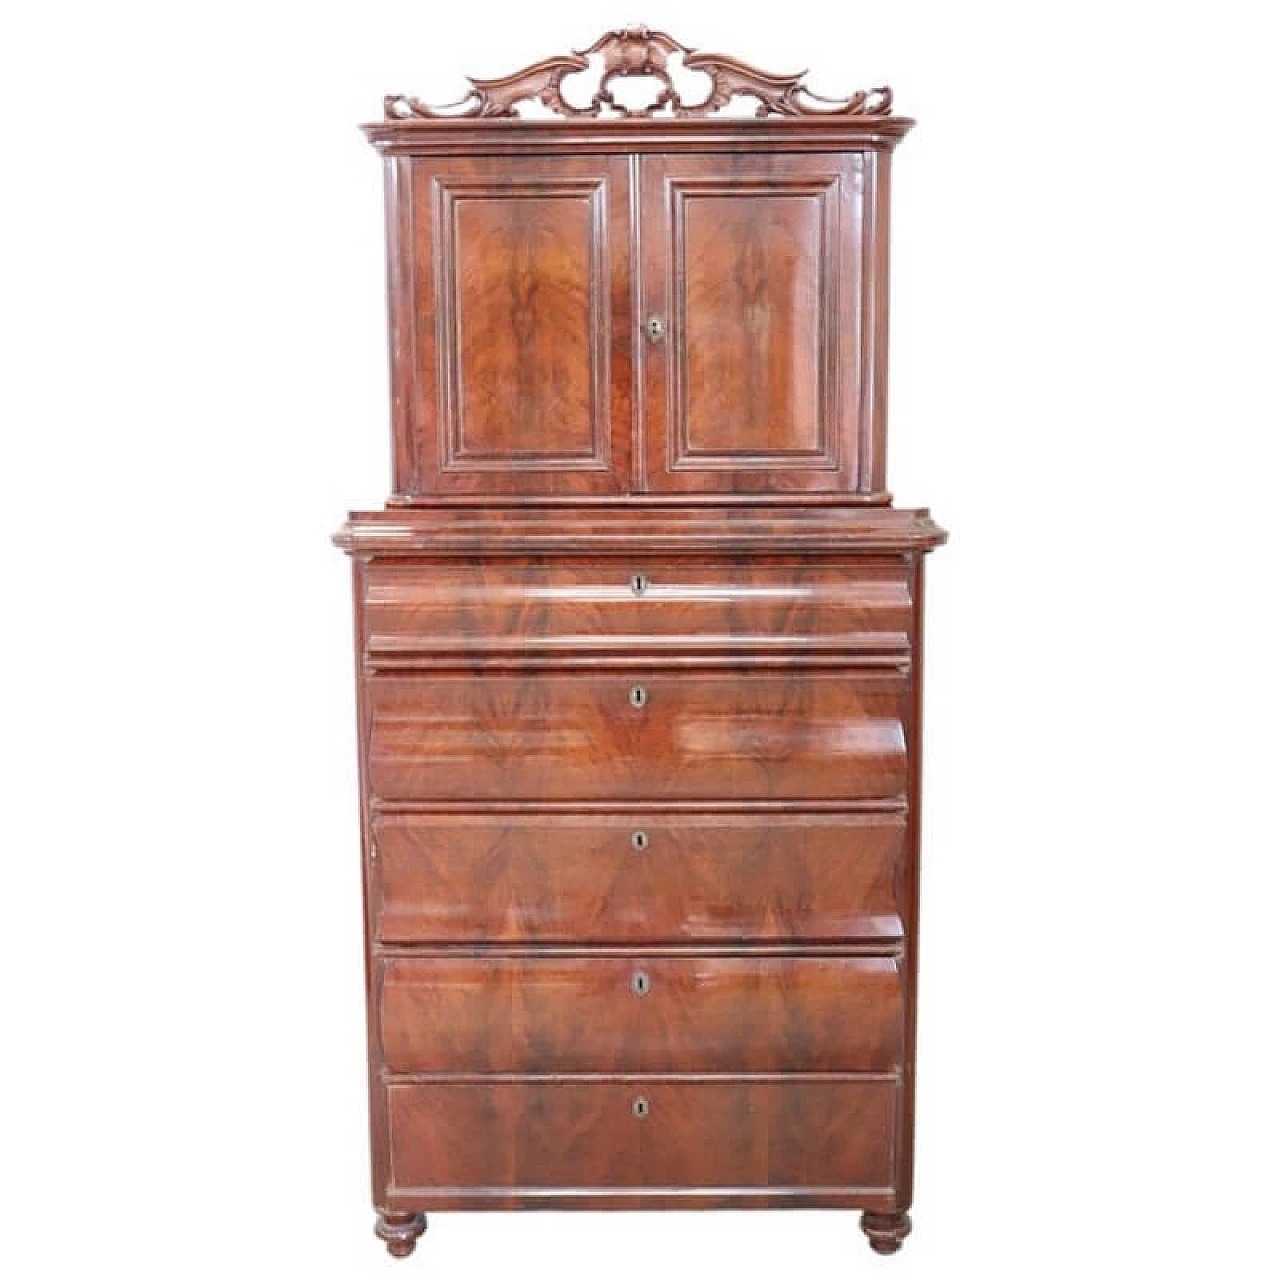 Antique chest of drawers with mahogany riser, 19th century 1067721